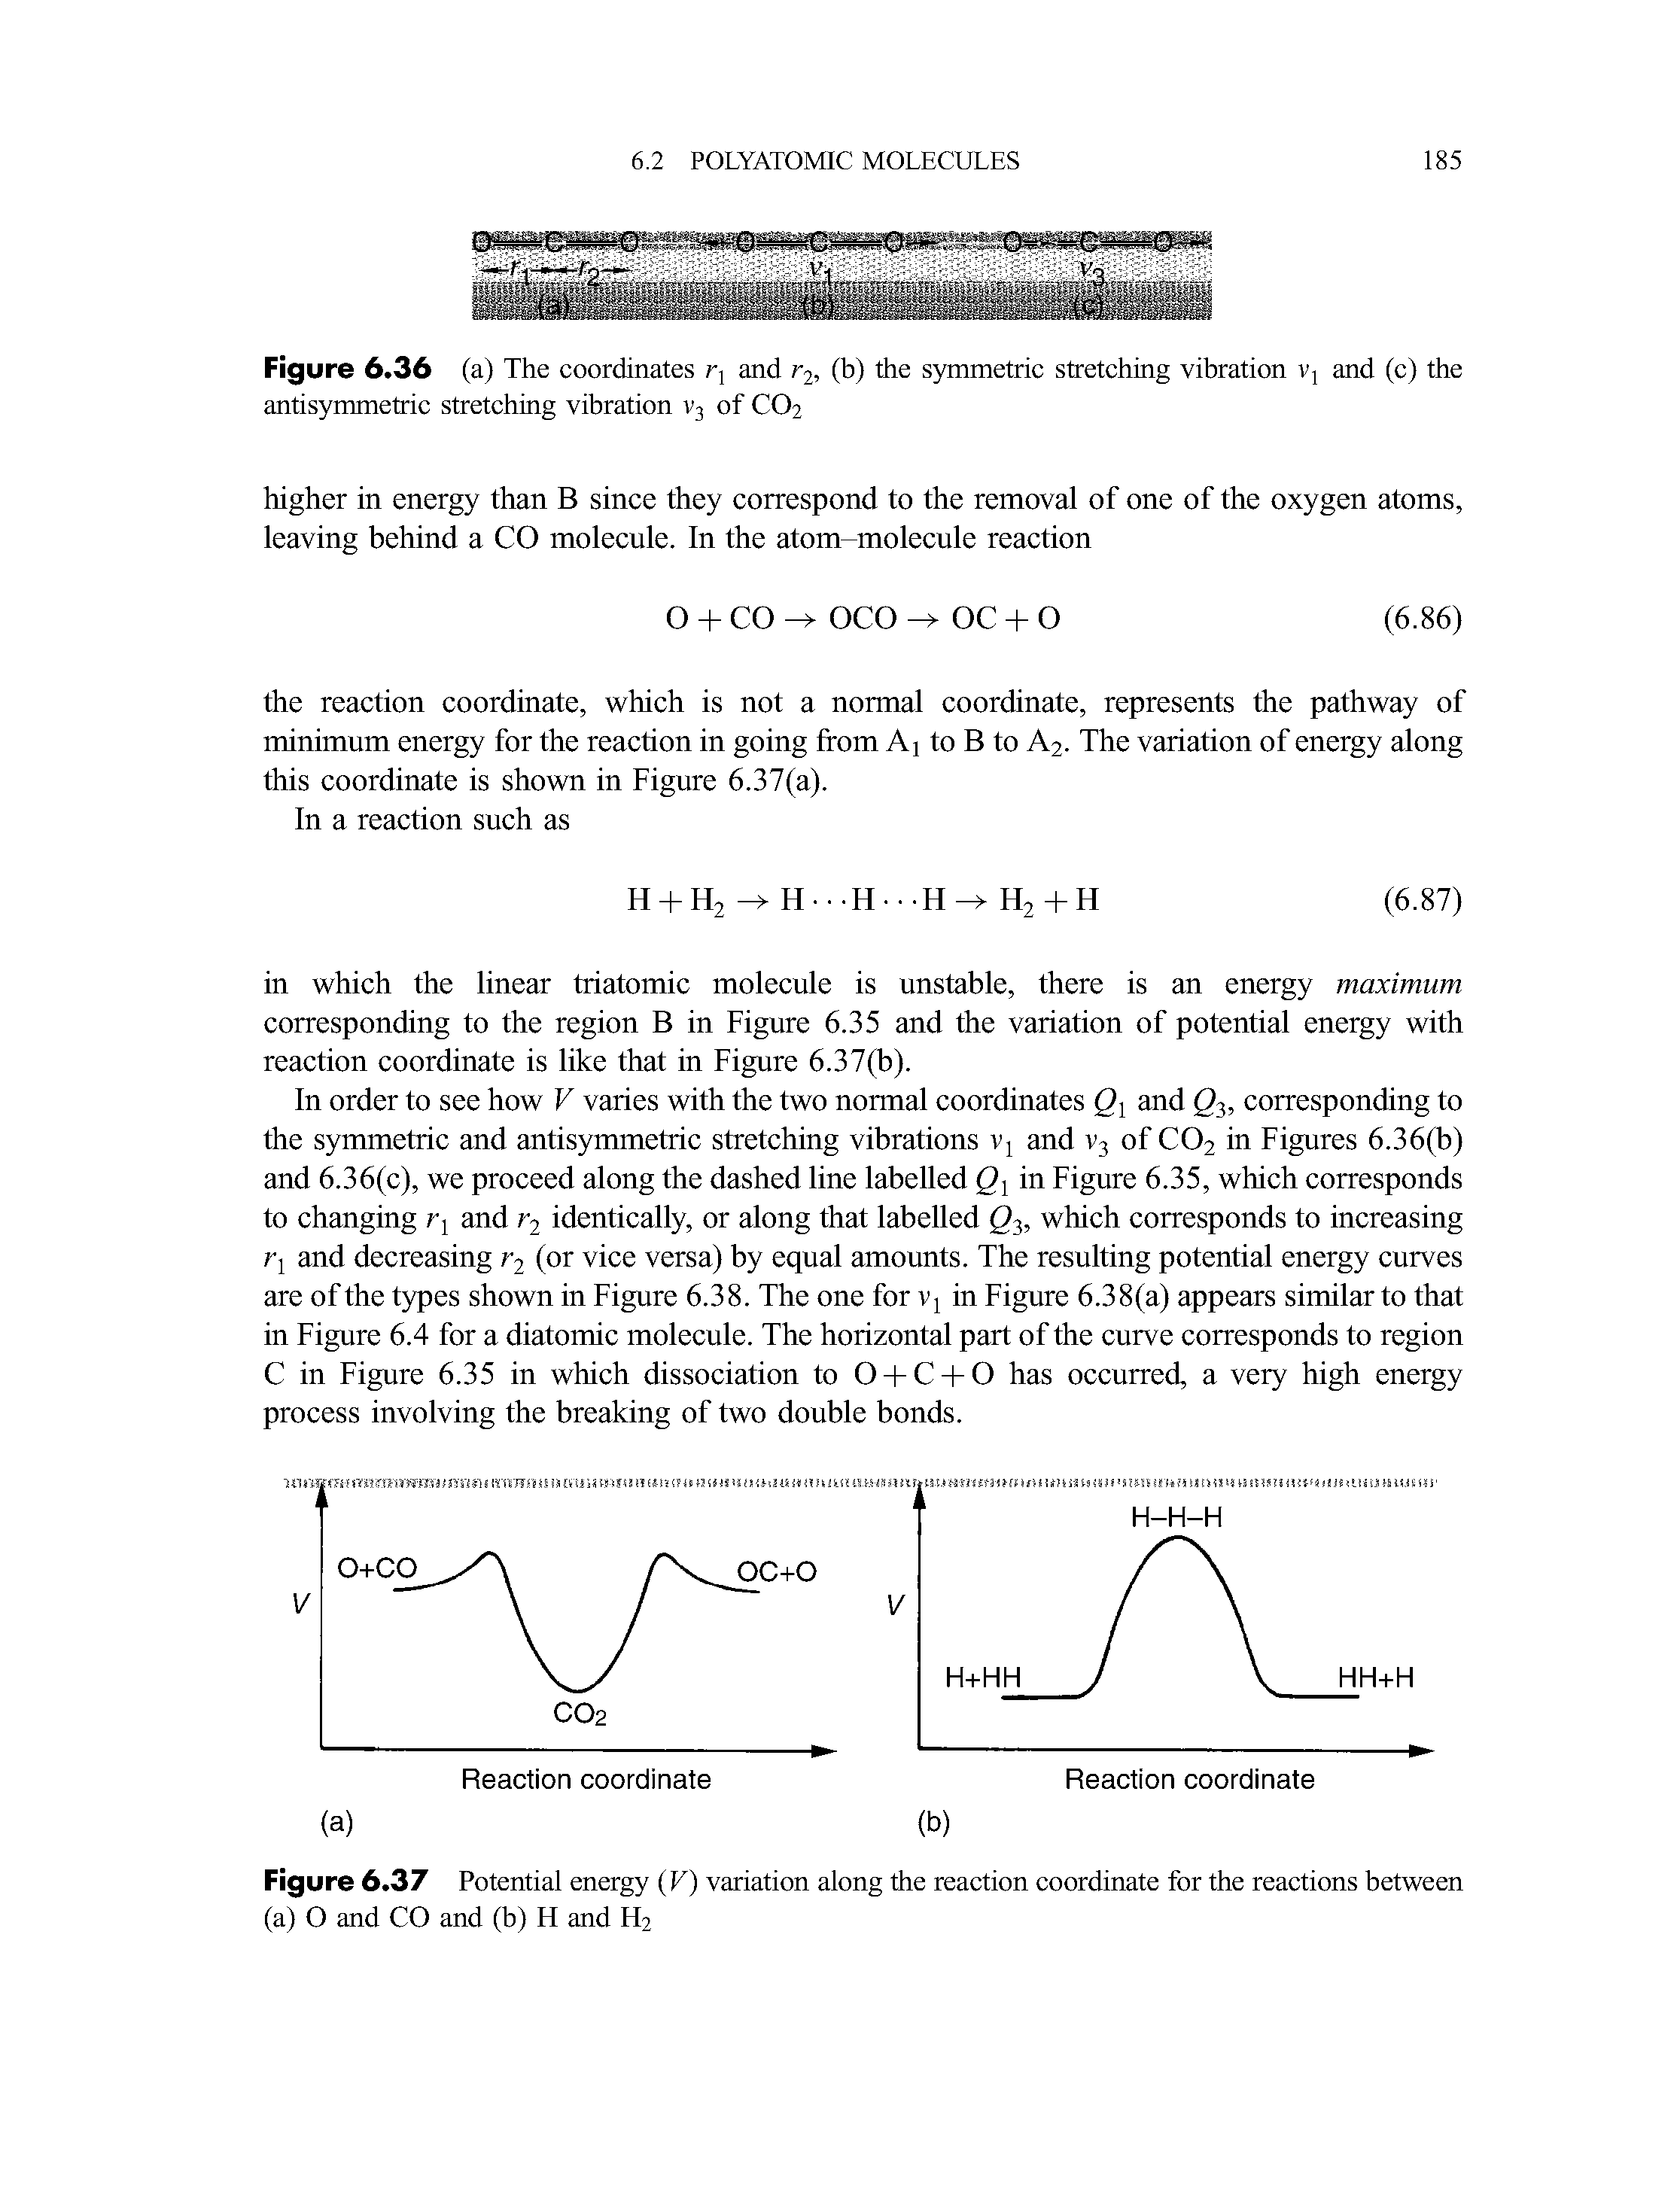 Figure 6.37 Potential energy (F) variation along the reaction coordinate for the reactions between (a) O and CO and (b) H and H2...